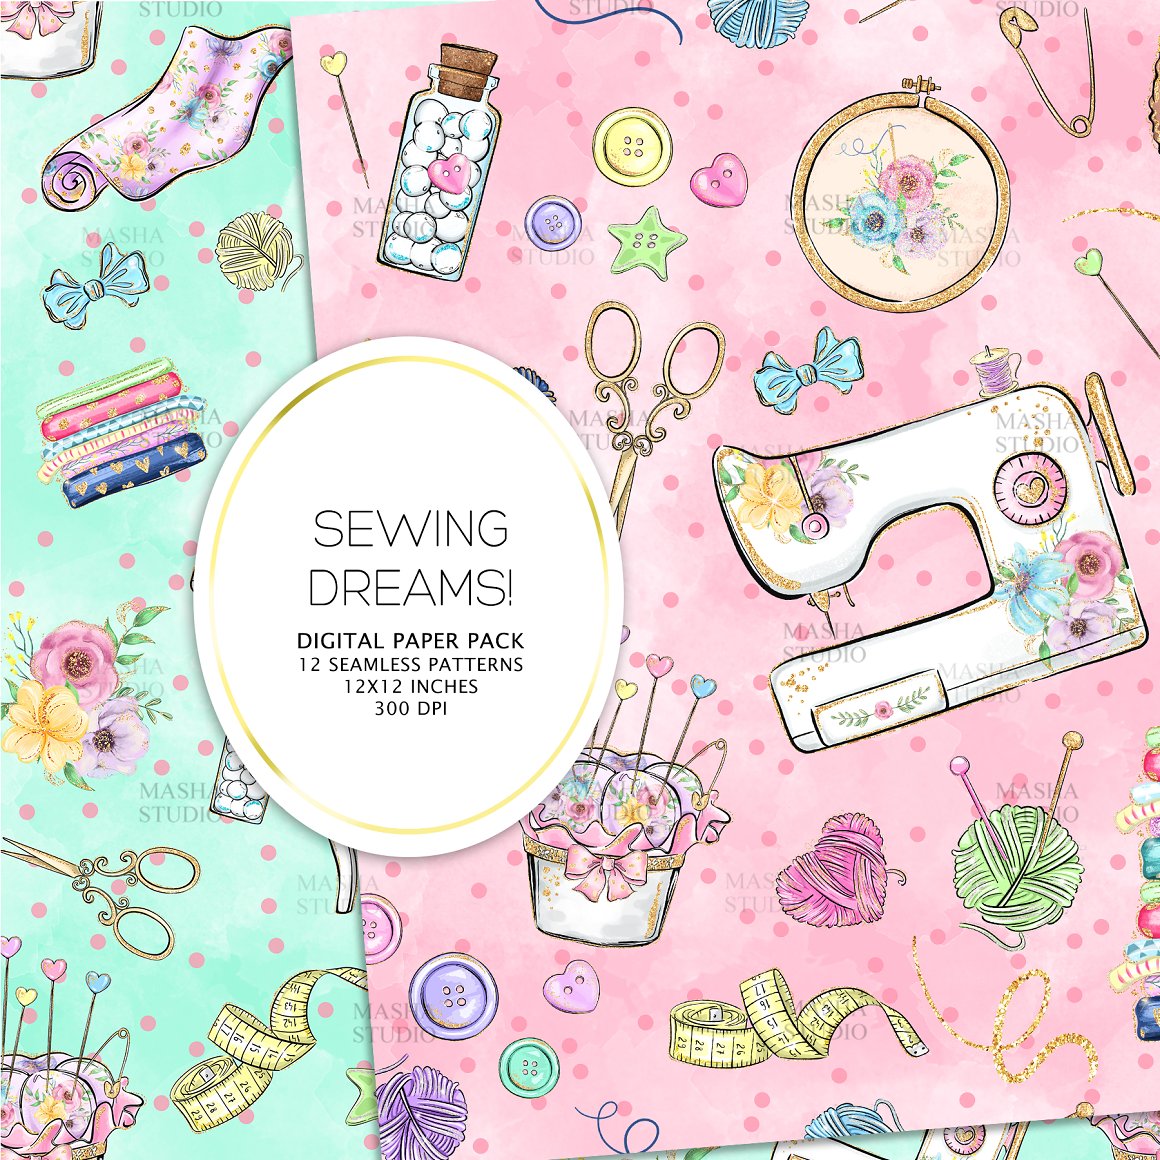 Neckline with sewing machine and fabric and other sewing supplies.